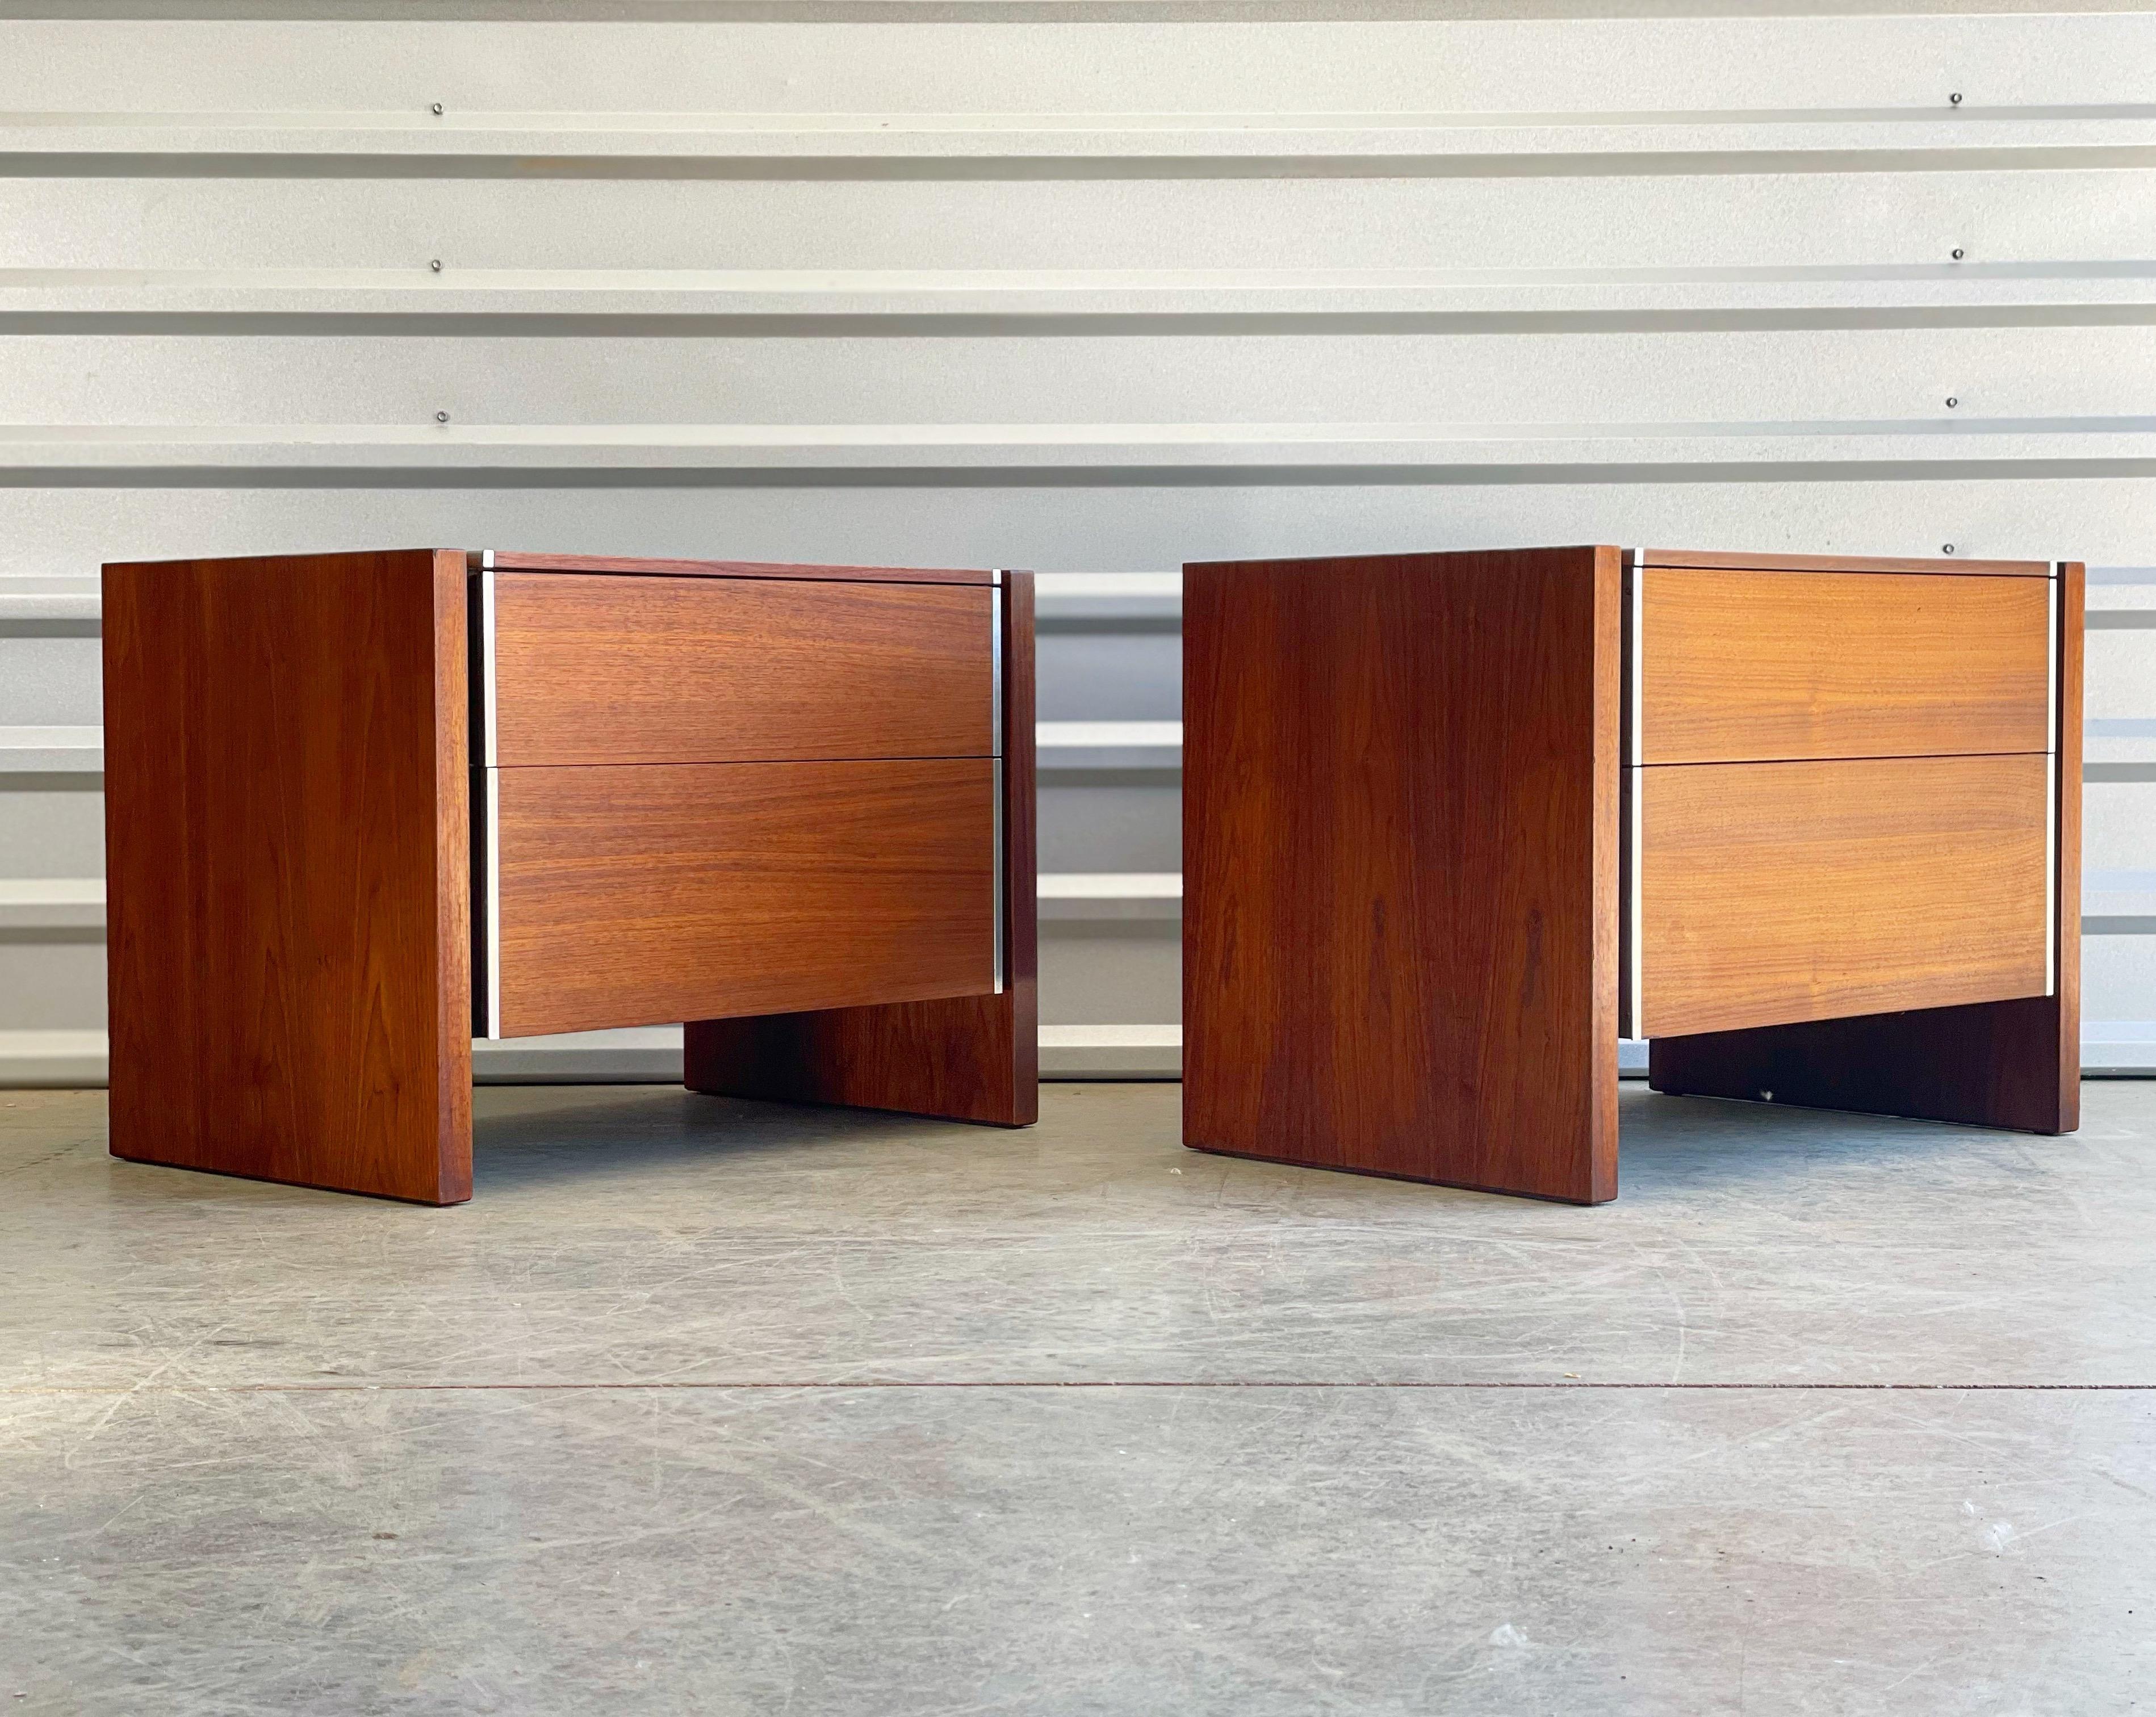 Pair of Mid-Century Modern night stands by Robert Baron in walnut and aluminum. Produced by Glenn of California and distributed and sold by John Stuart. Quality American design and craftsmanship. Minimalist design. Excellent original condition. No